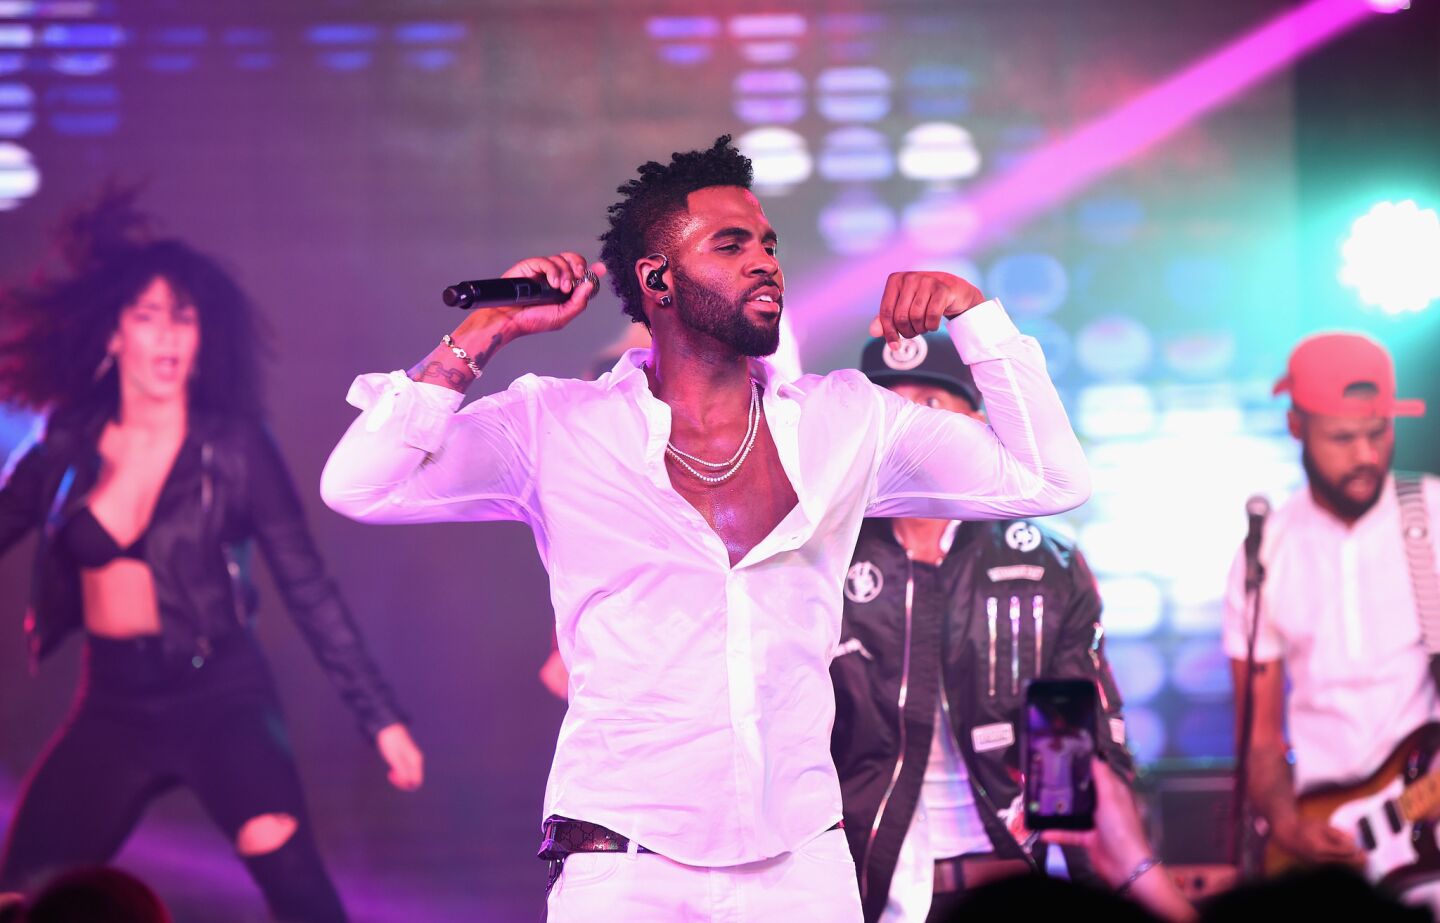 Jason Derulo performs at the "Harmonist" cocktail party at the Plage du Grand Hyatt during the Cannes Film Festival on Sunday.